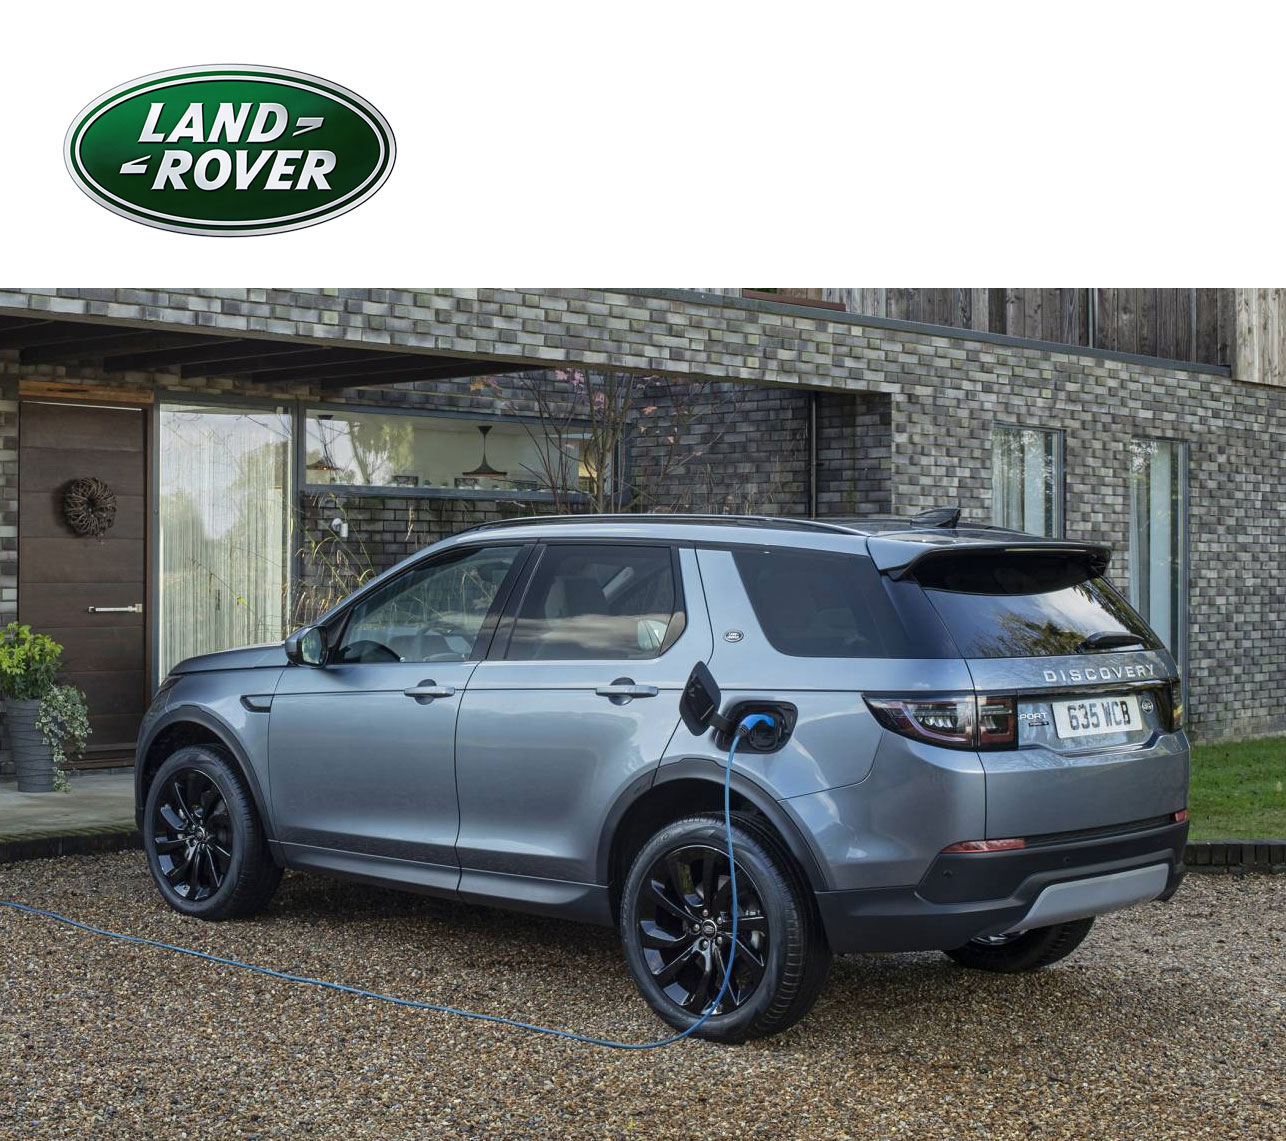 https://www.e-station.it/wp-content/uploads/2020/11/land-rover-discovery-sport-phev.jpg